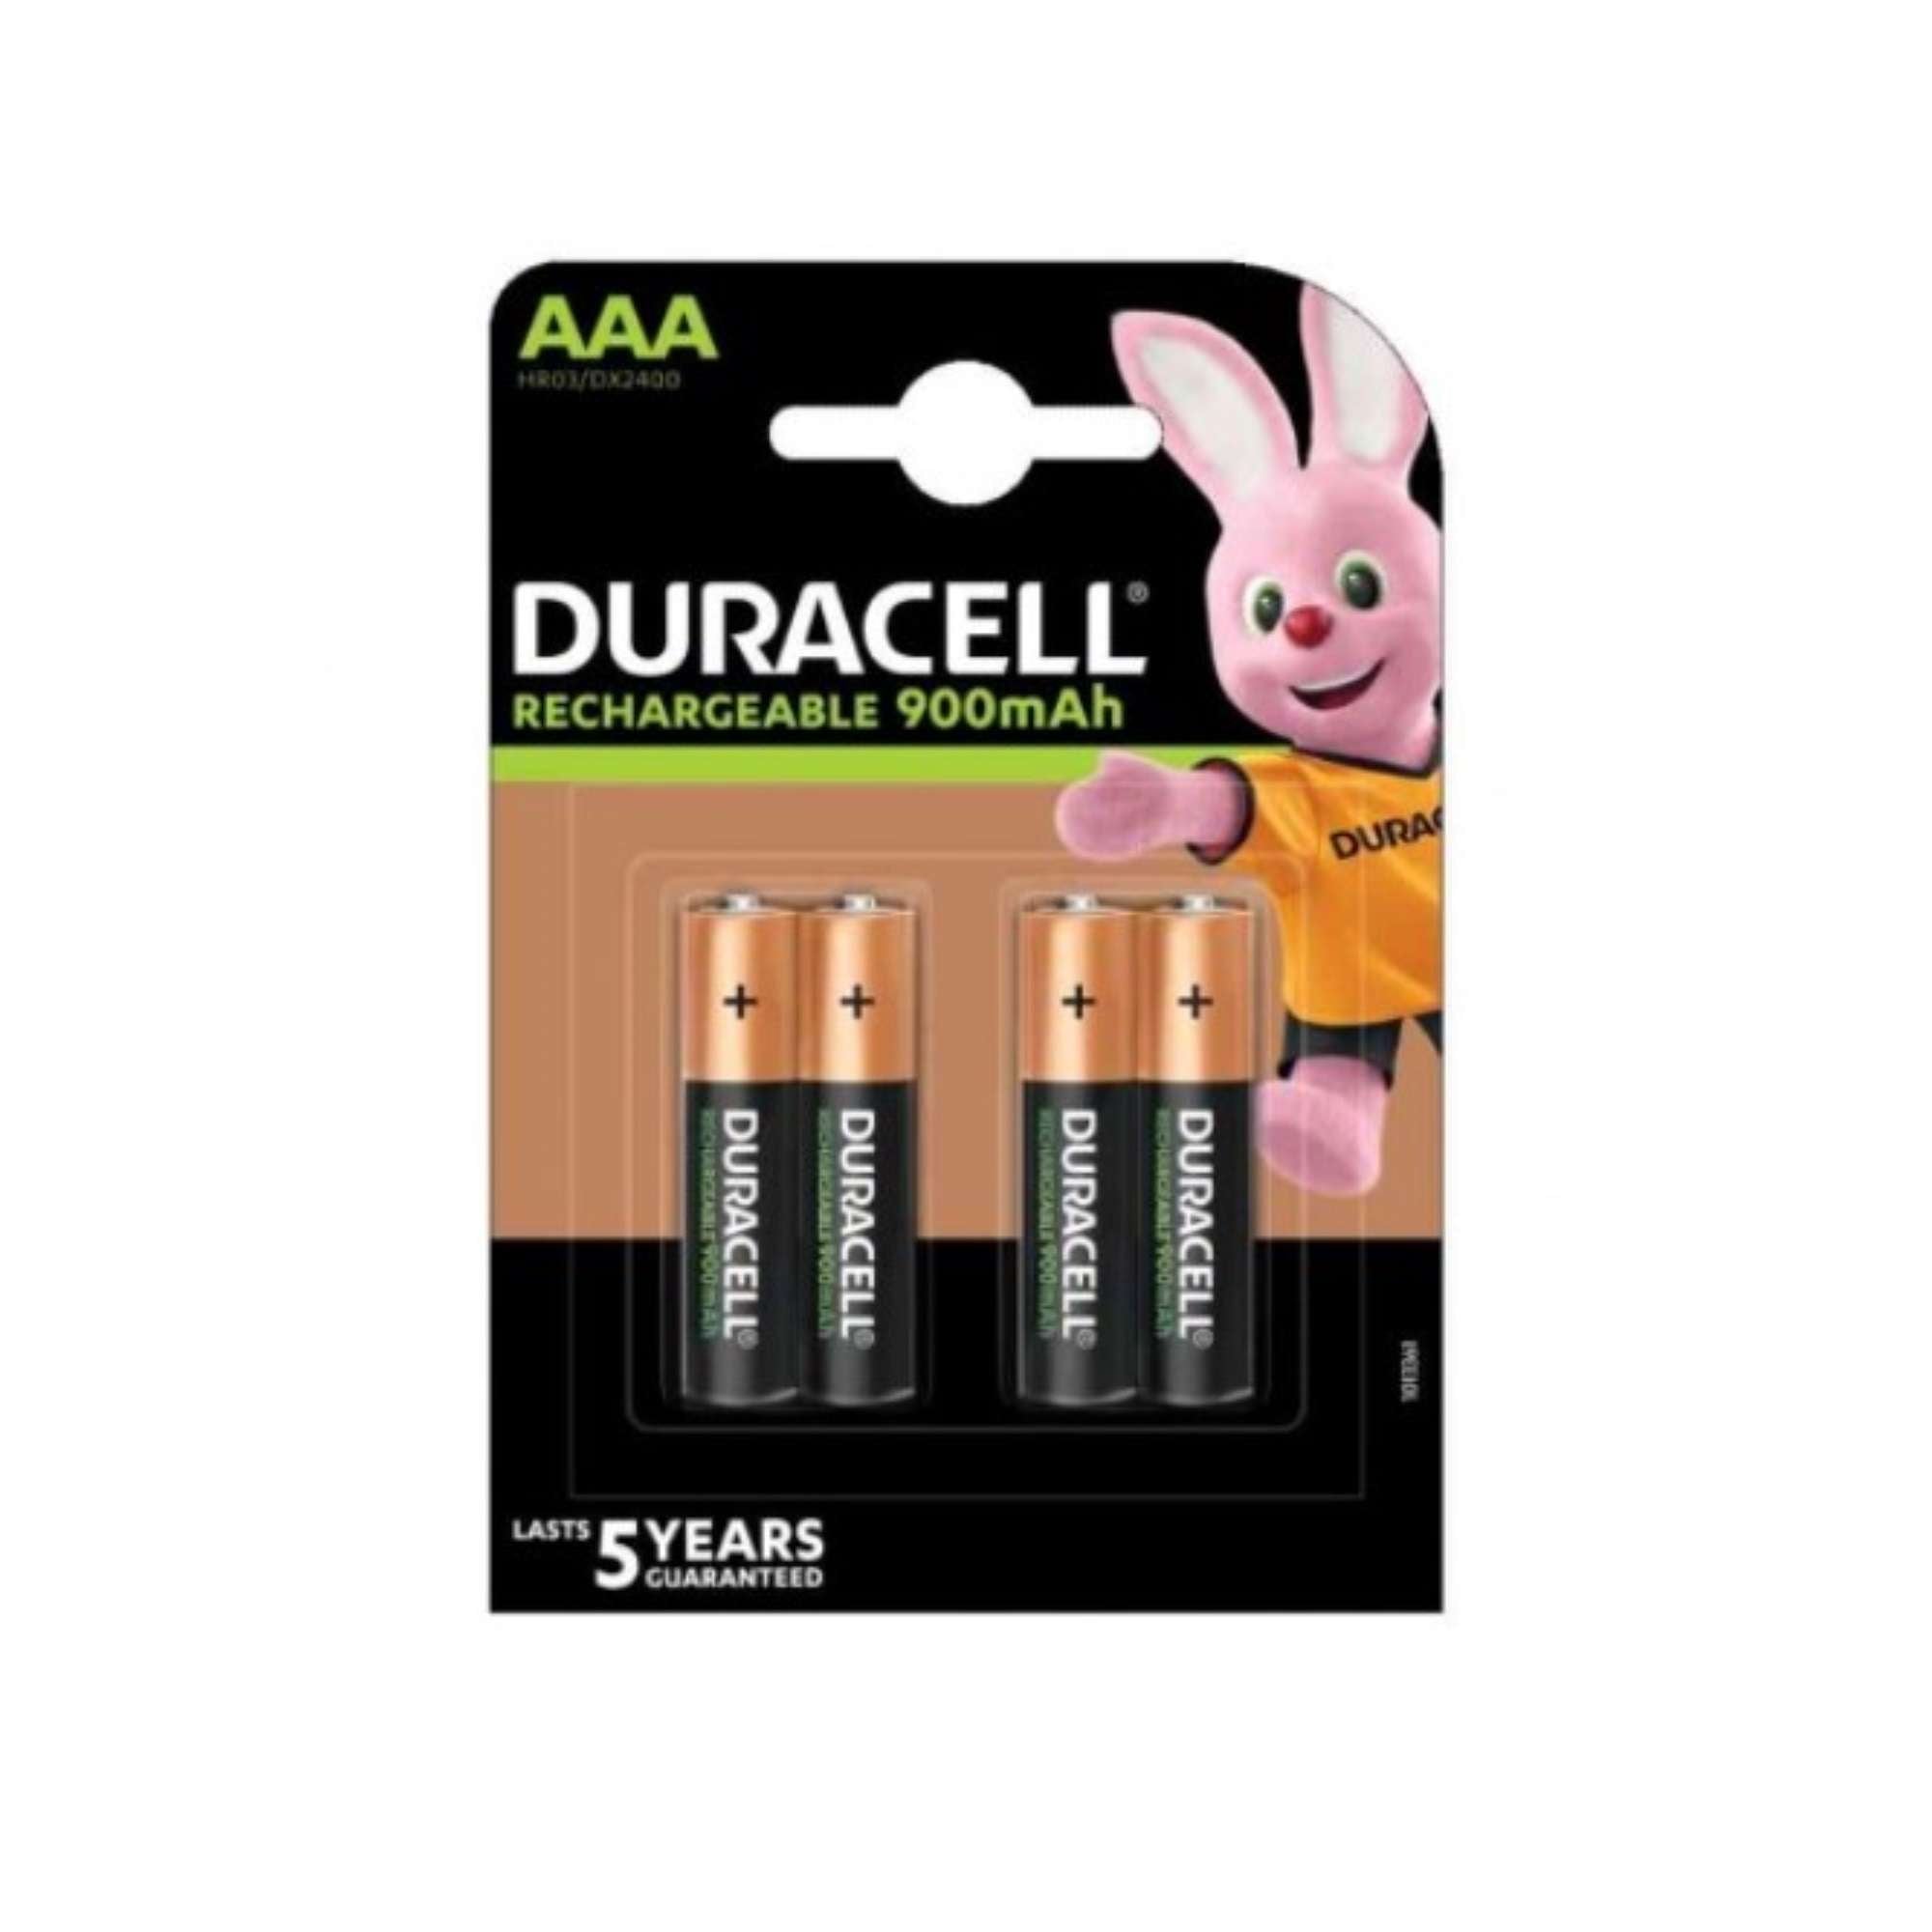 Mini rechargeable batteries, blister with 4 batteries - DURACELL AAA 4